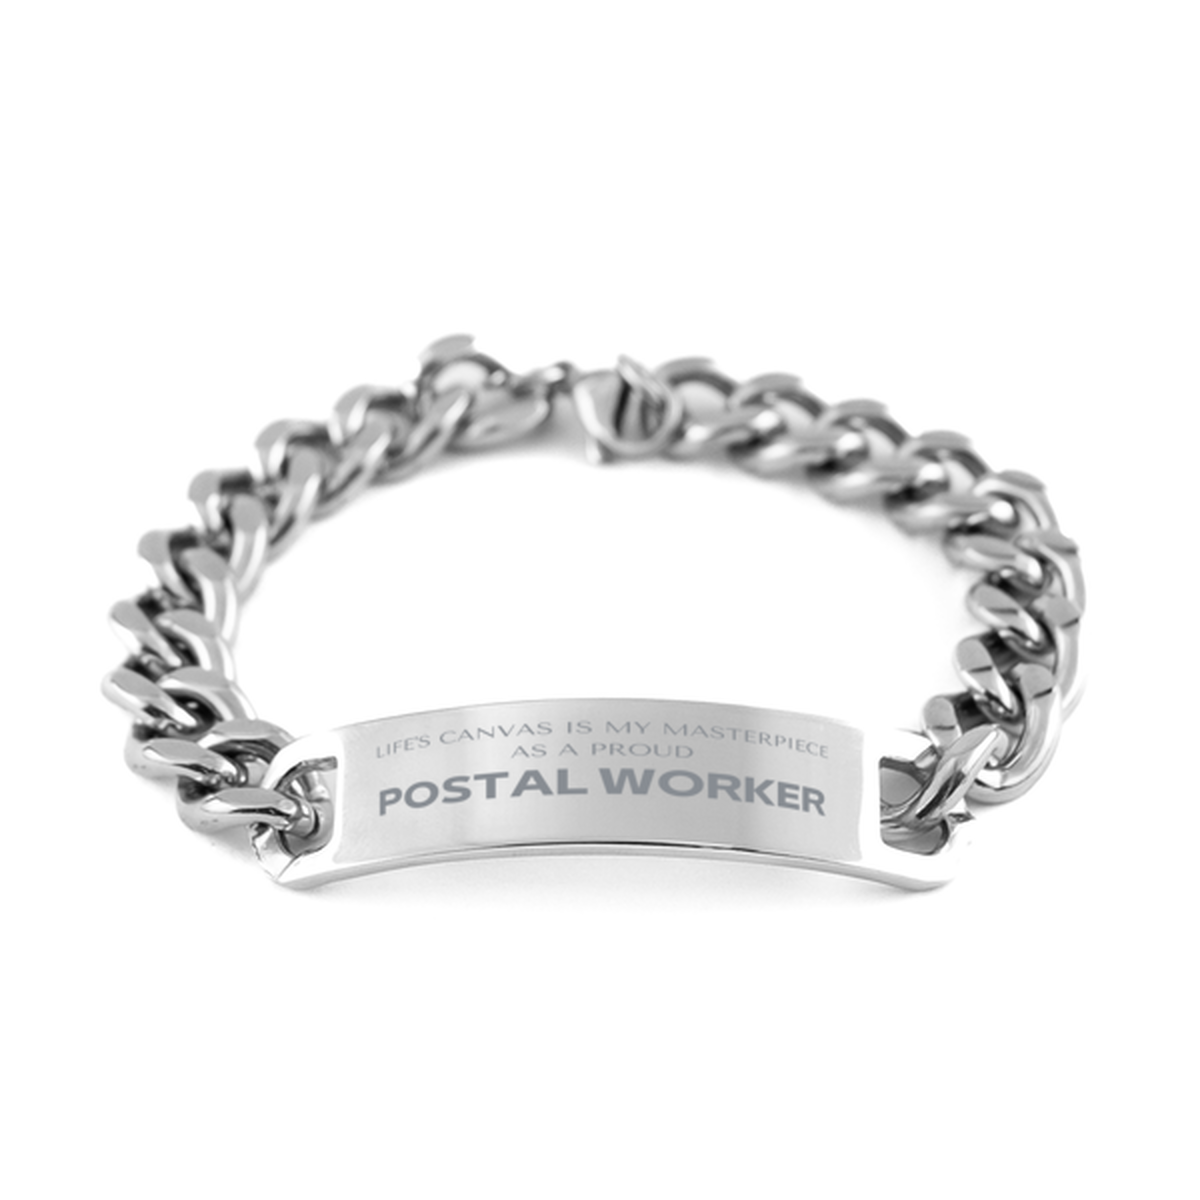 Proud Postal Worker Gifts, Life's canvas is my masterpiece, Epic Birthday Christmas Unique Cuban Chain Stainless Steel Bracelet For Postal Worker, Coworkers, Men, Women, Friends